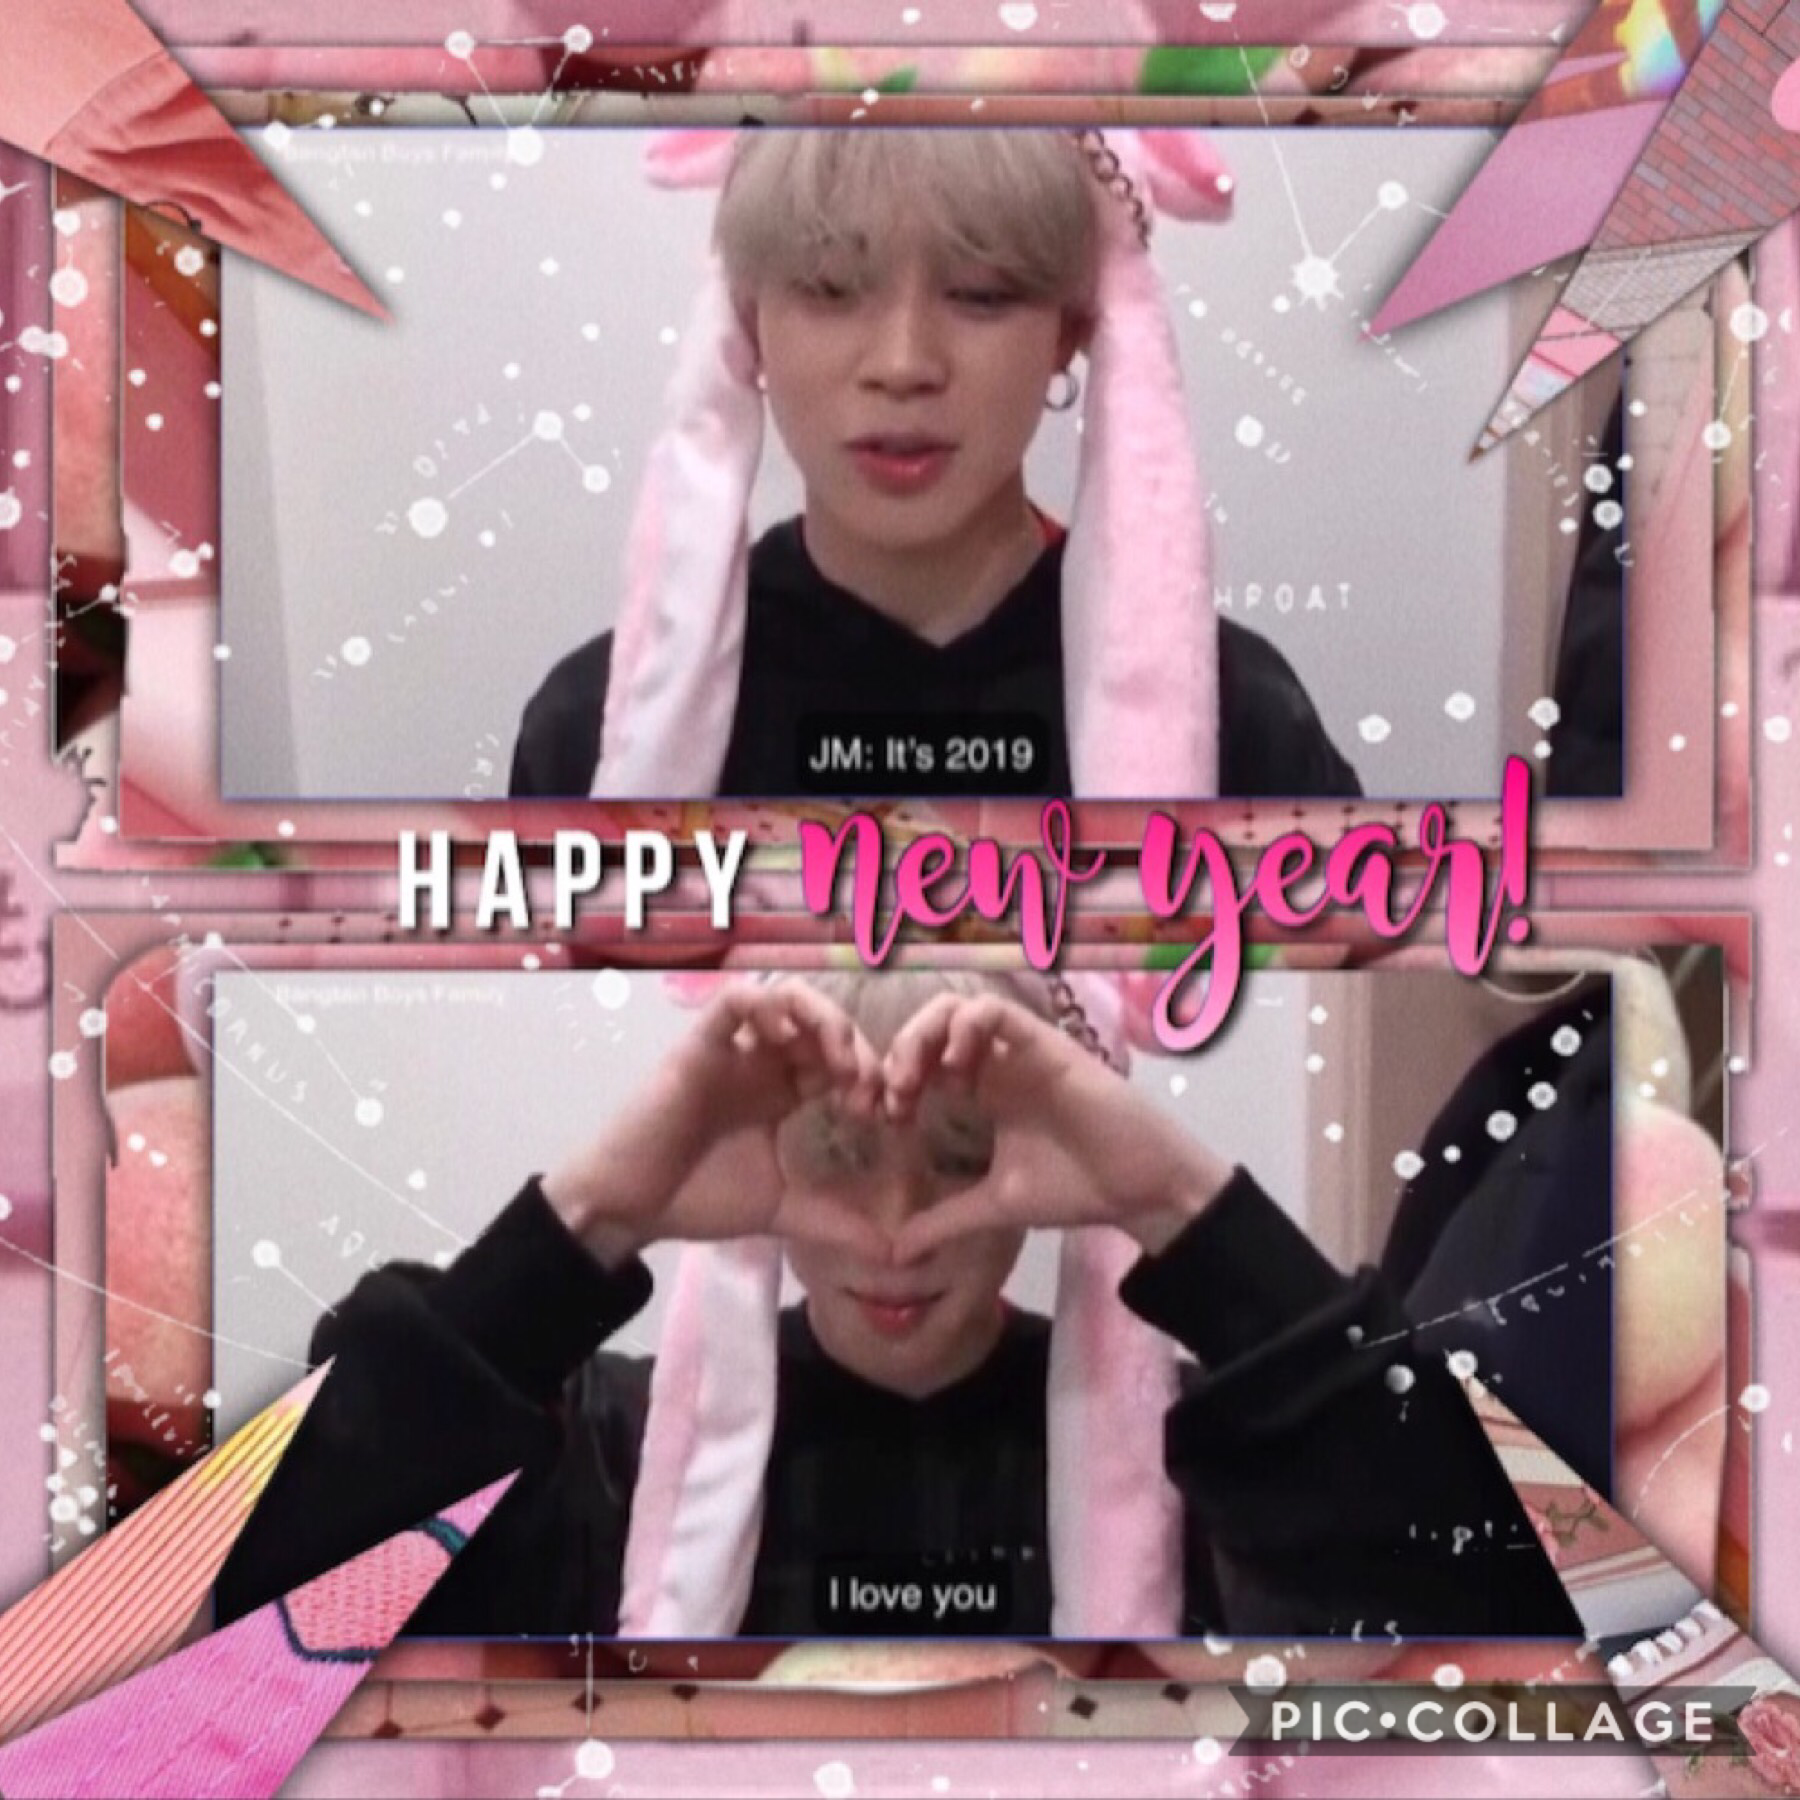 💓tap💓

happy new years guyyysss! hope this year is a good one and you will all be happy and eat lots of nice foods. also jimin’s solo song is so gOOD. if you haven’t heard it it’s called ‘promise’ and it is the best tune ever 